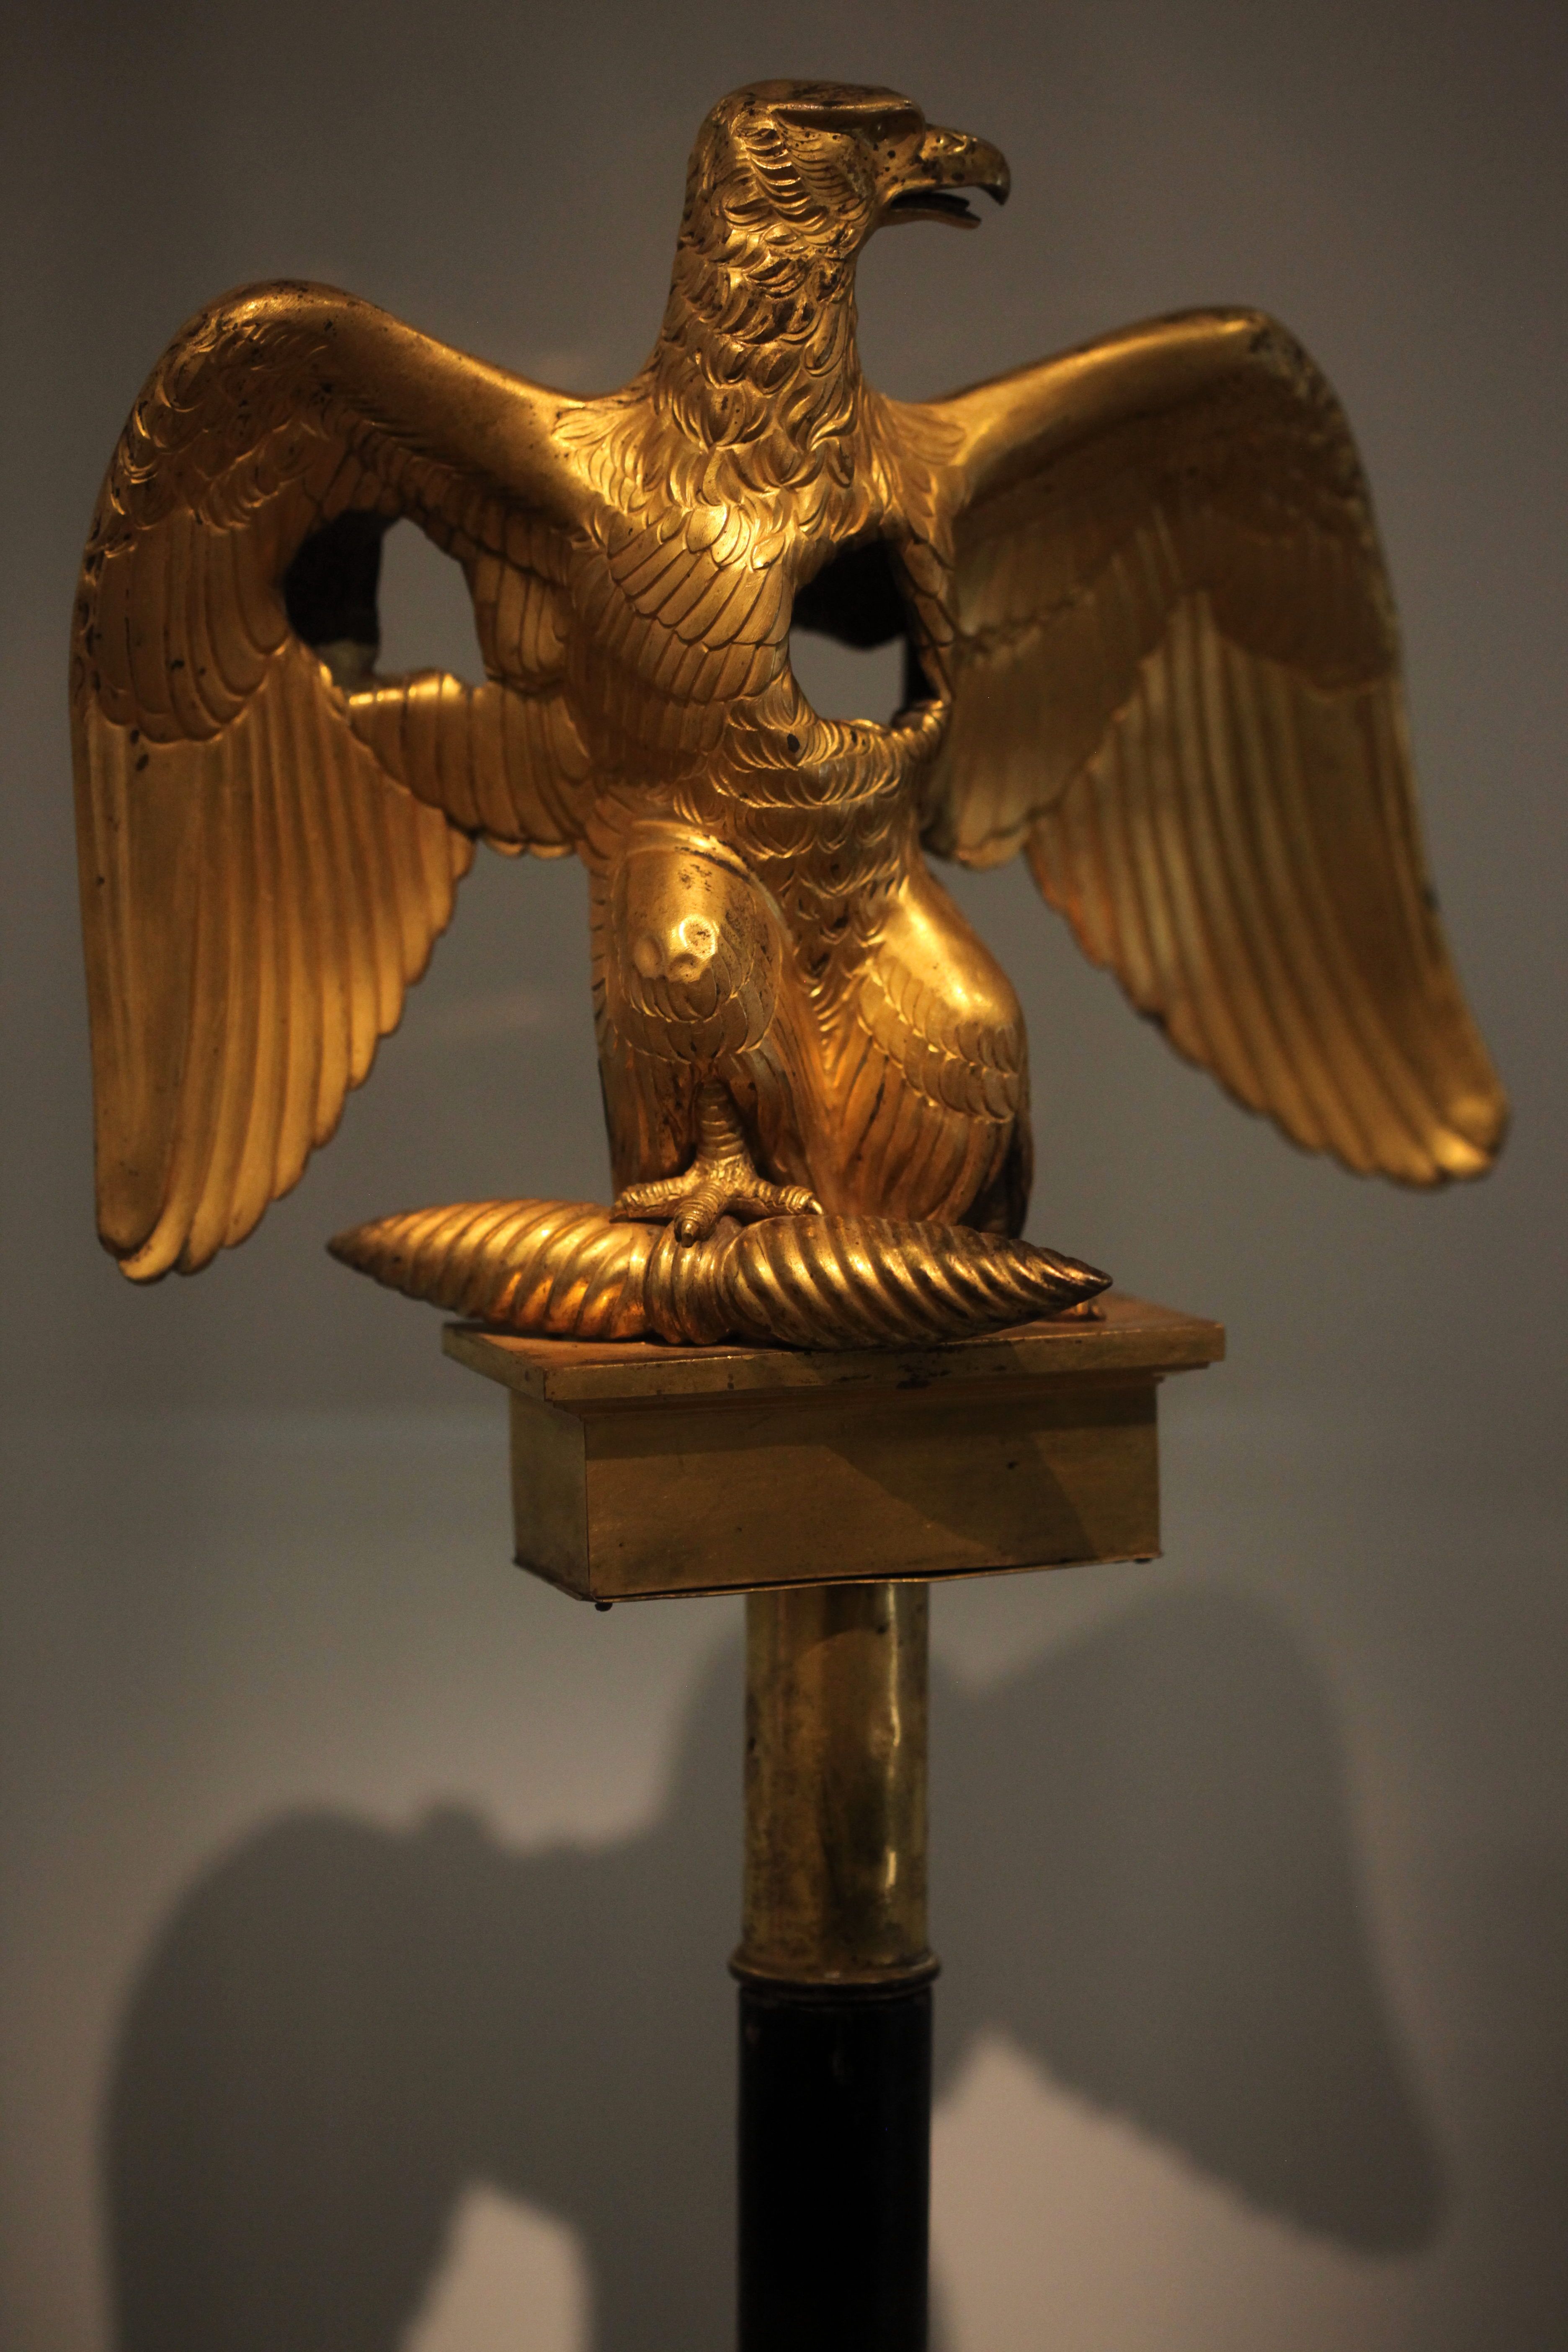 A French Imperial Eagle, carried by Napoleon's regiments. This one was damaged by enemy fire, 1811. Musée de l'Armée. 